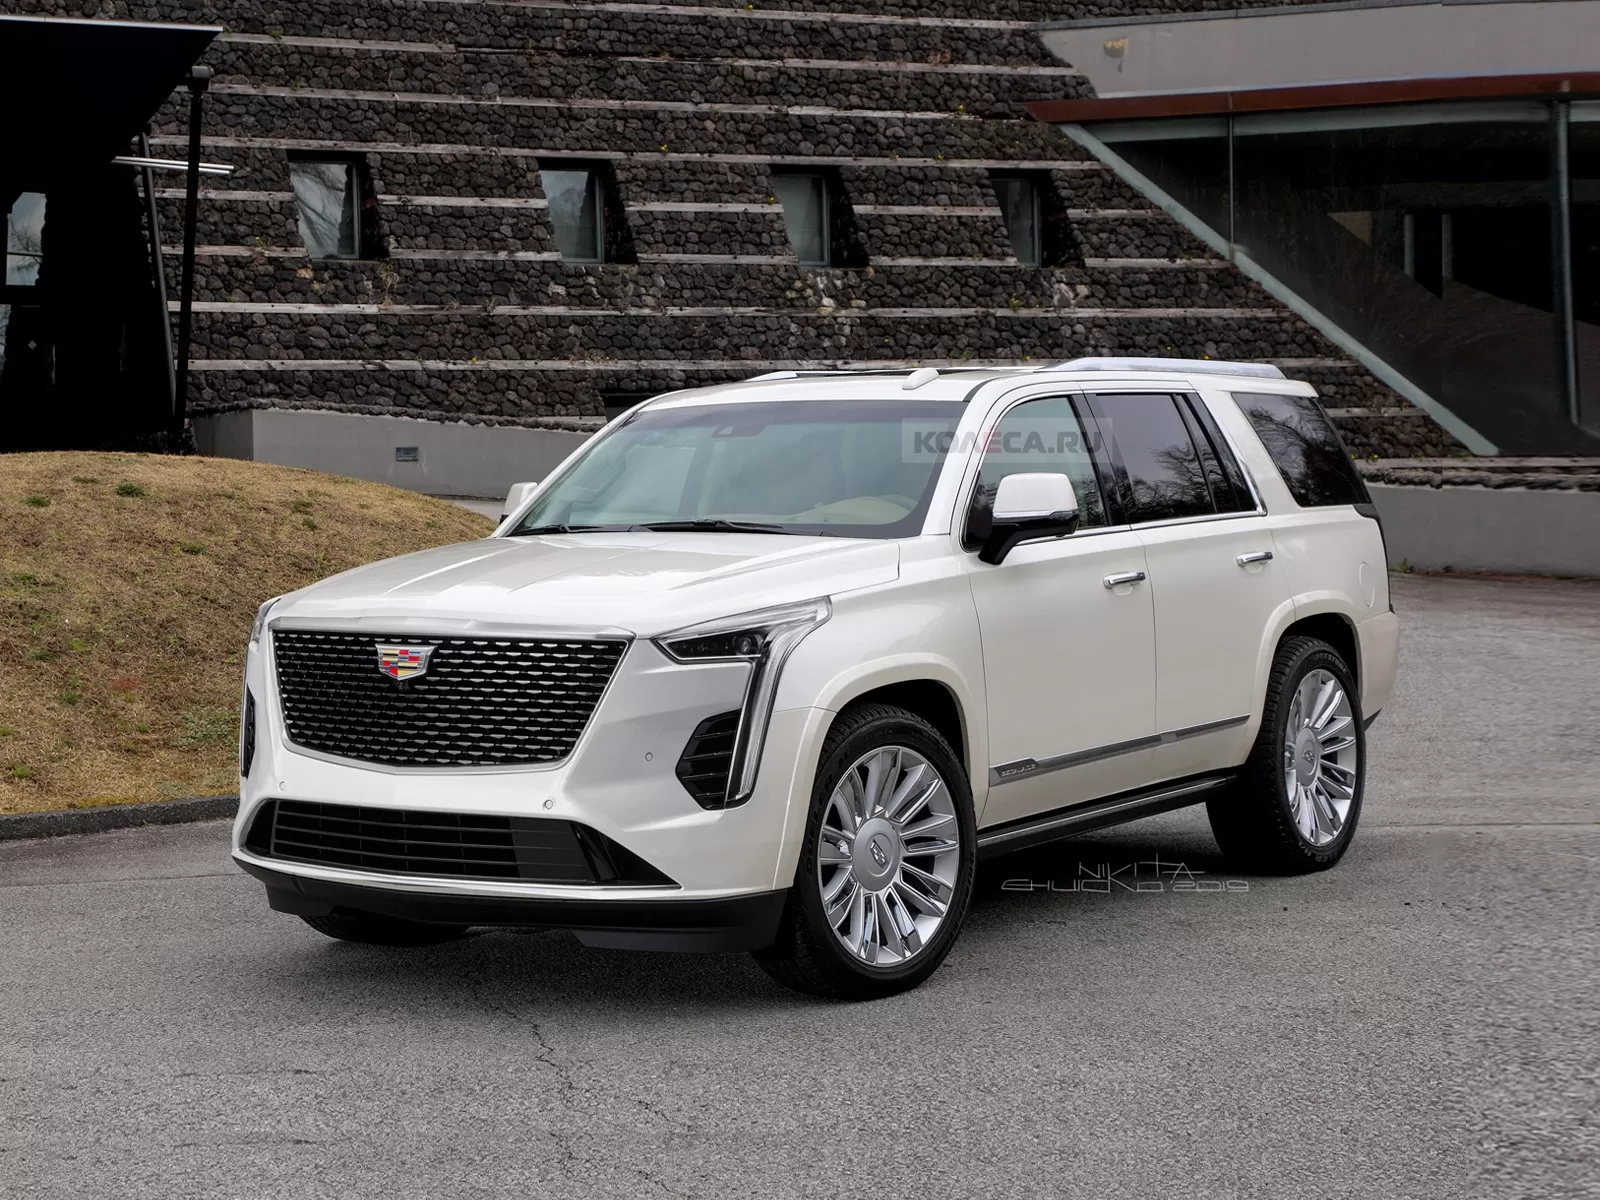 2021 Cadillac Escalade Looks Much Better Than All-New Chevrolet Tahoe